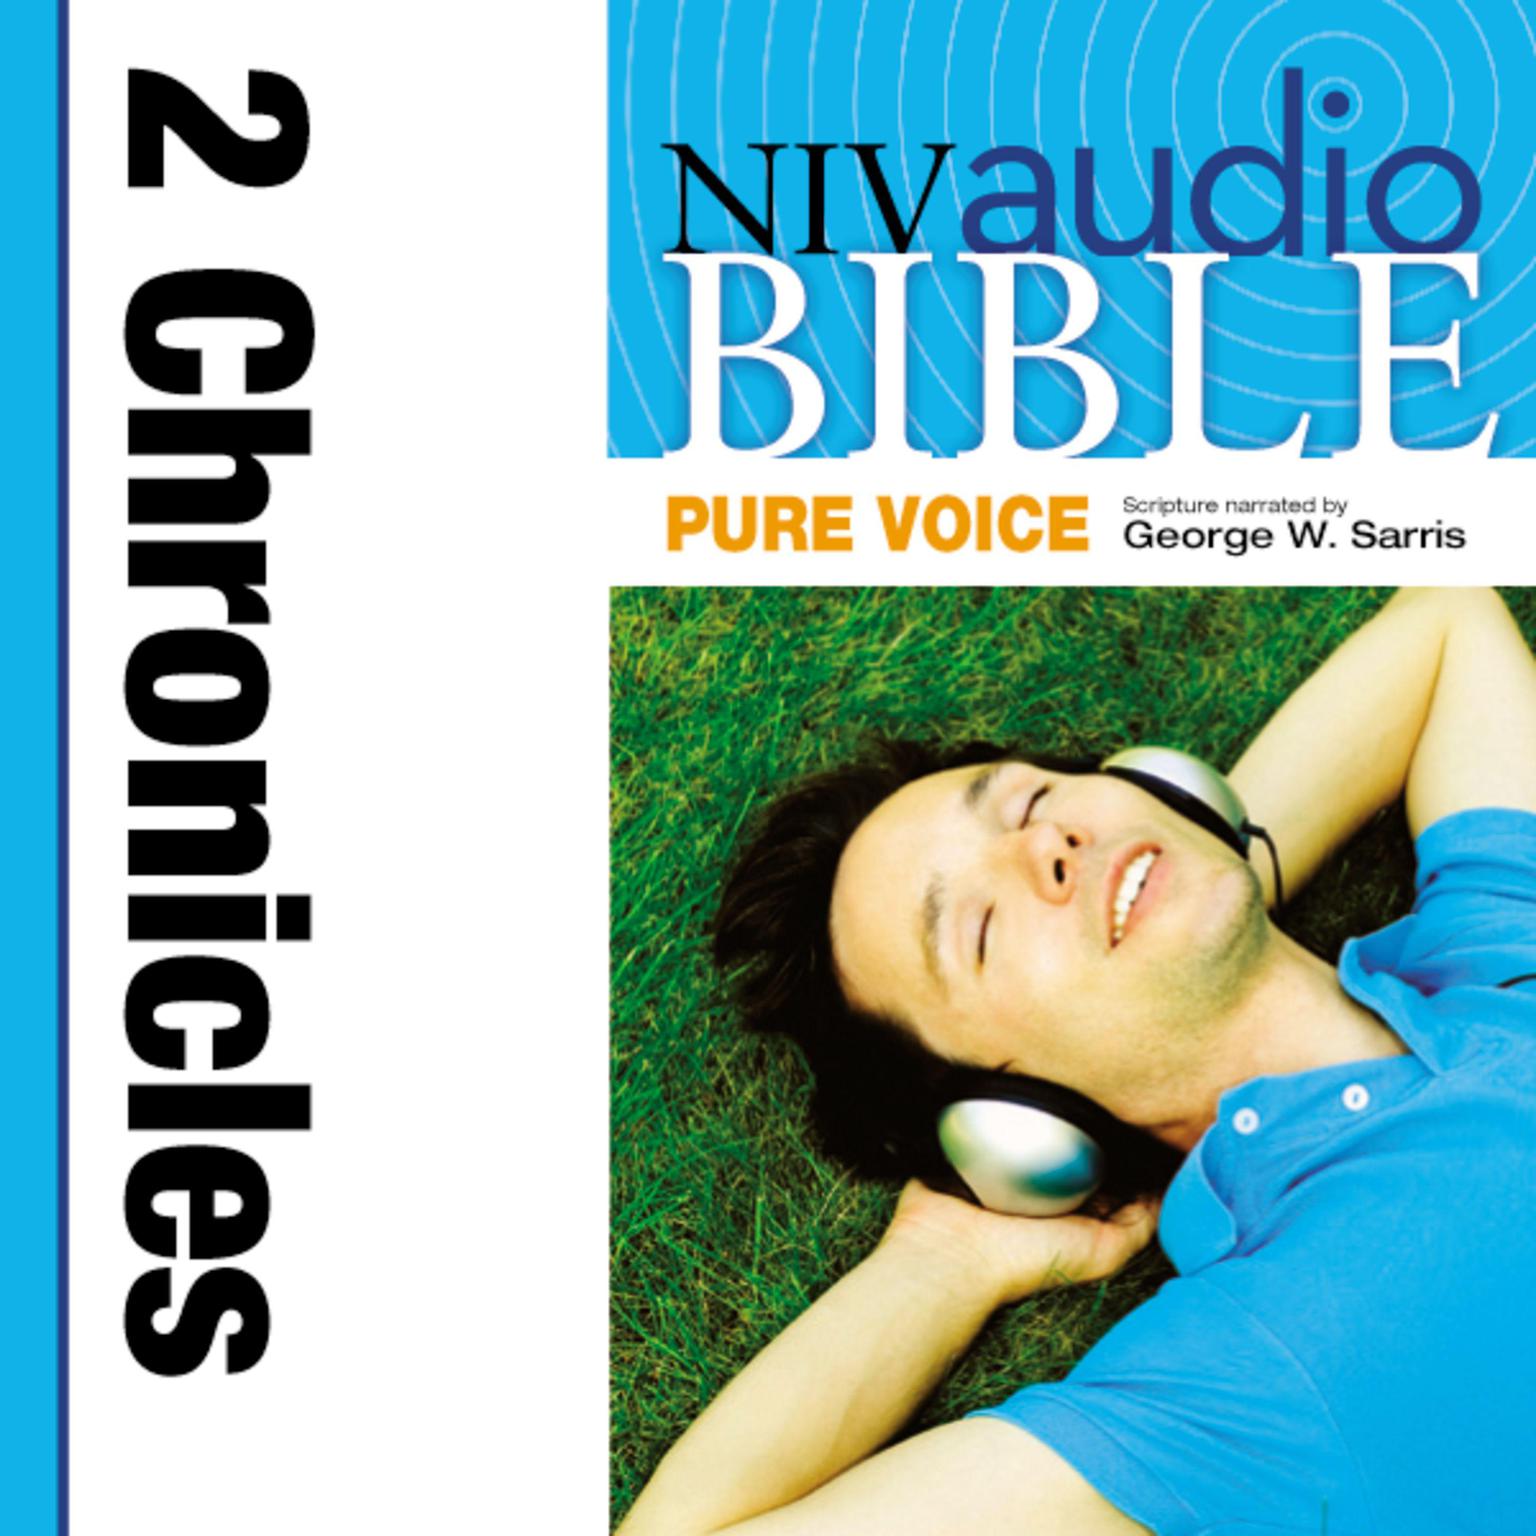 Pure Voice Audio Bible - New International Version, NIV (Narrated by George W. Sarris): (13) 2 Chronicles Audiobook, by Zondervan